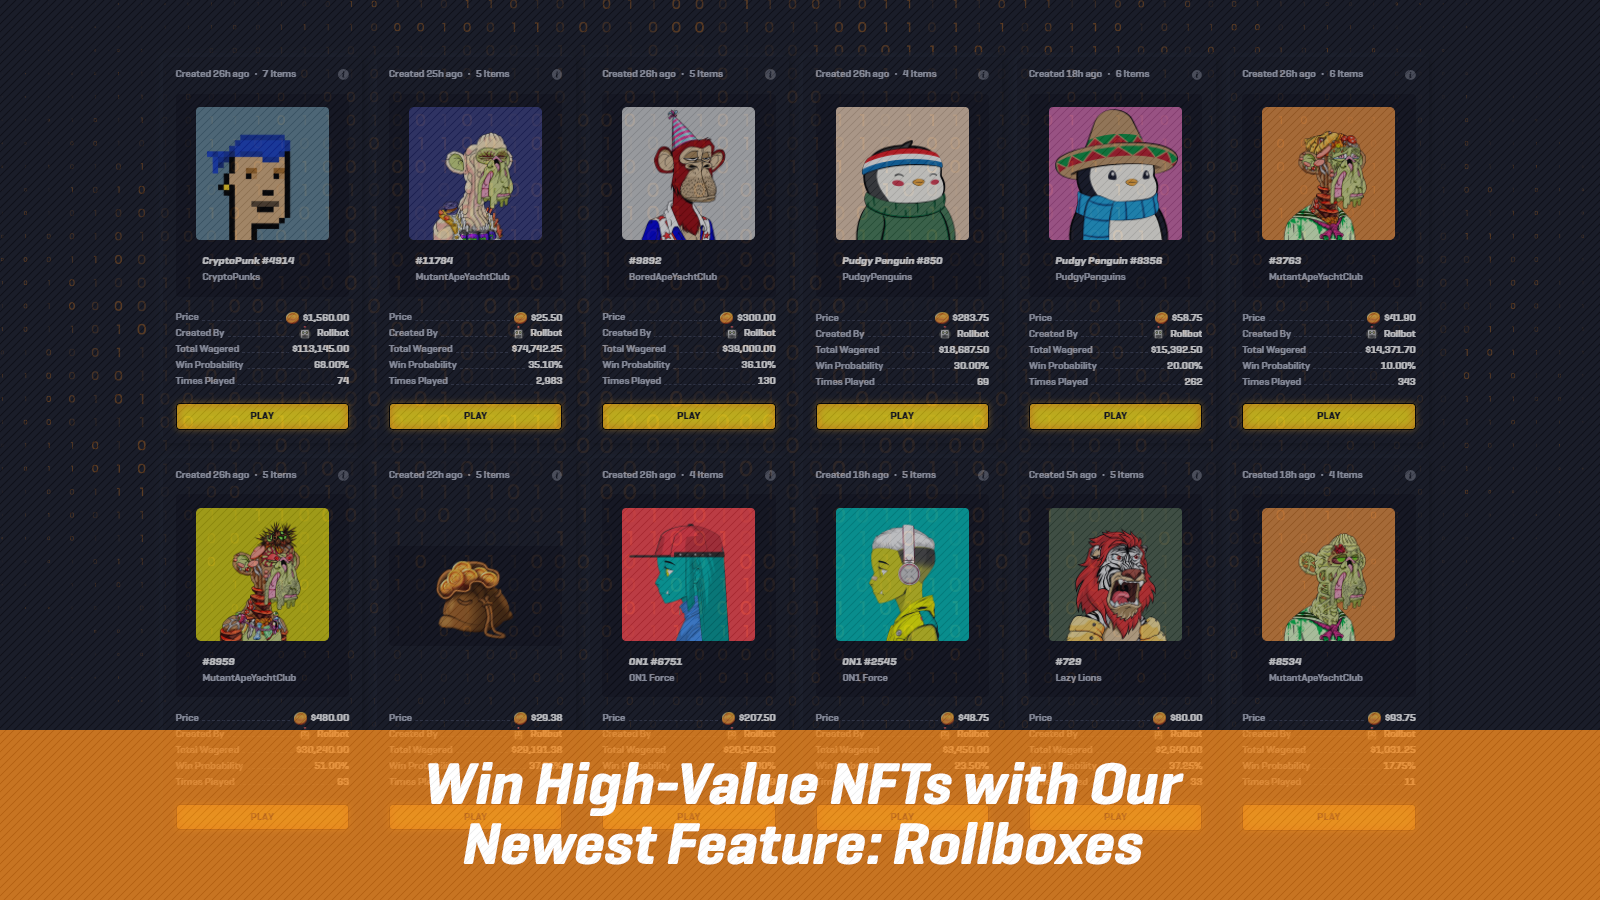 Win High-Value NFTs with Our Newest Feature: Rollboxes!